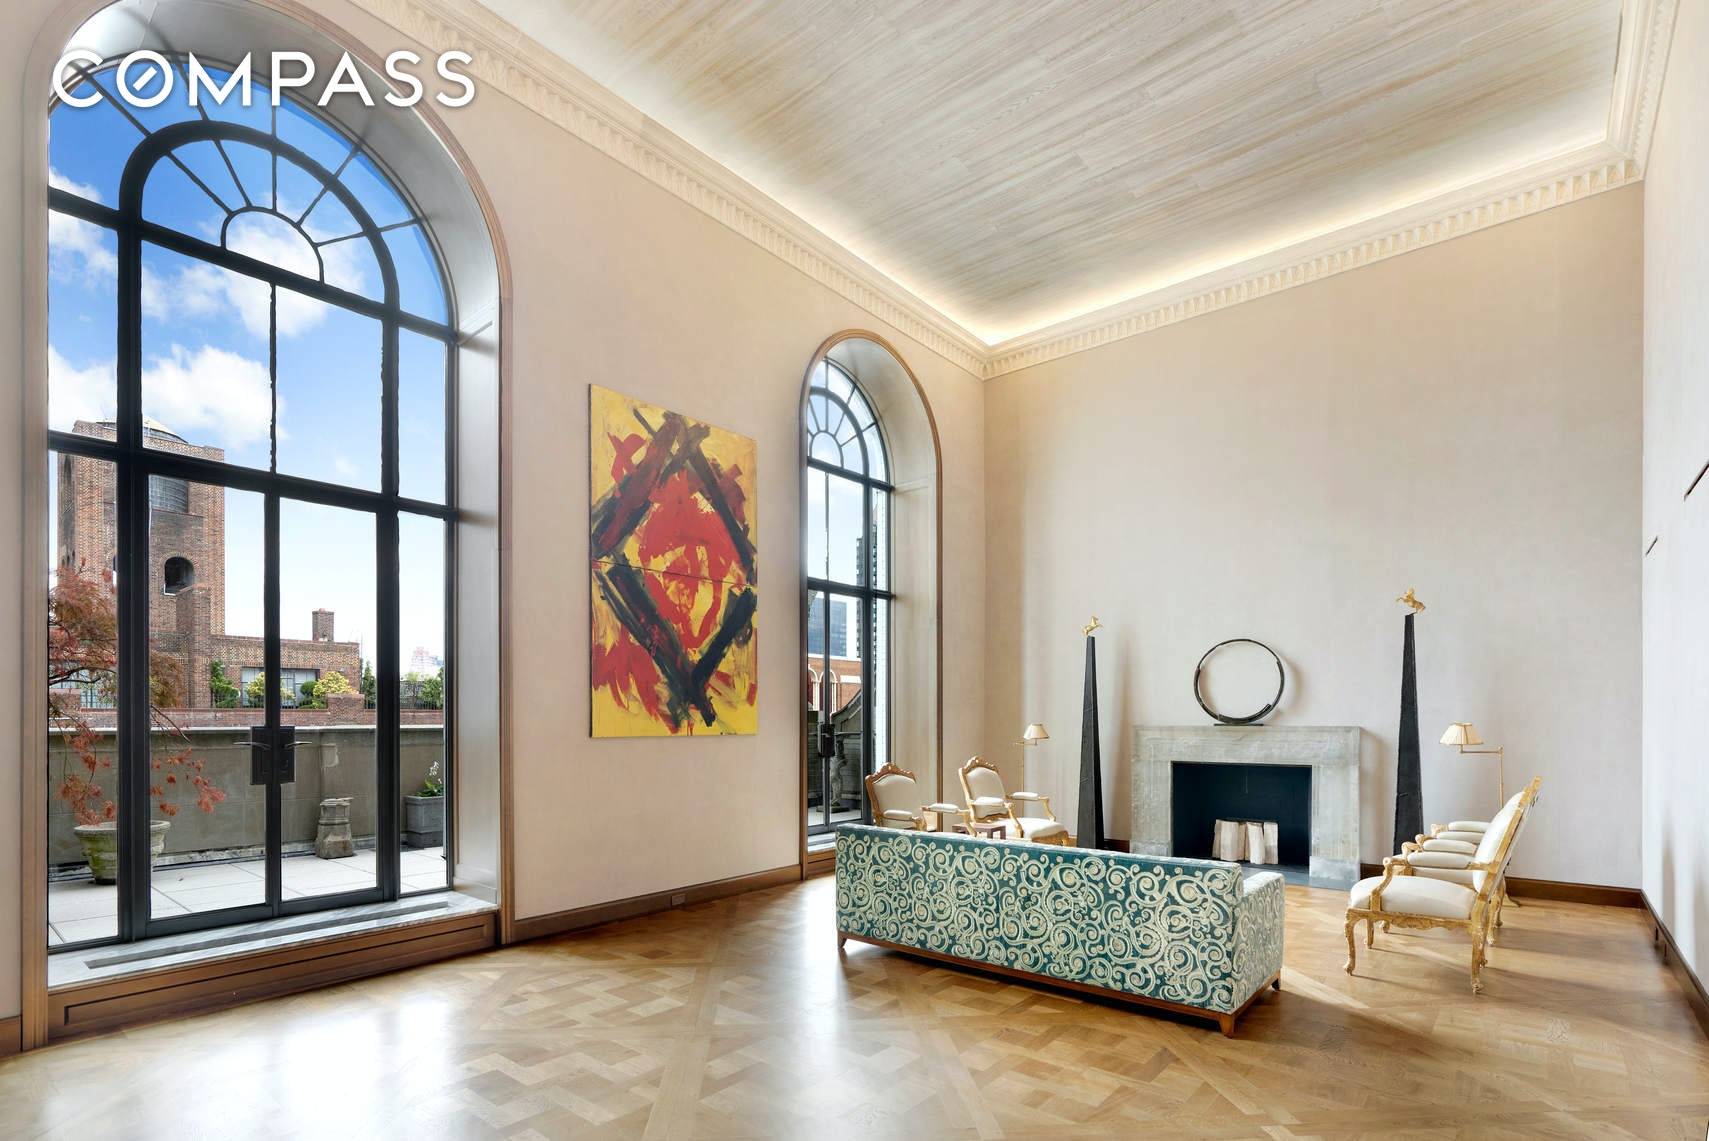 This dramatic duplex located in Sutton Place boasts architectural details and open city views through spectacular oversized windows.